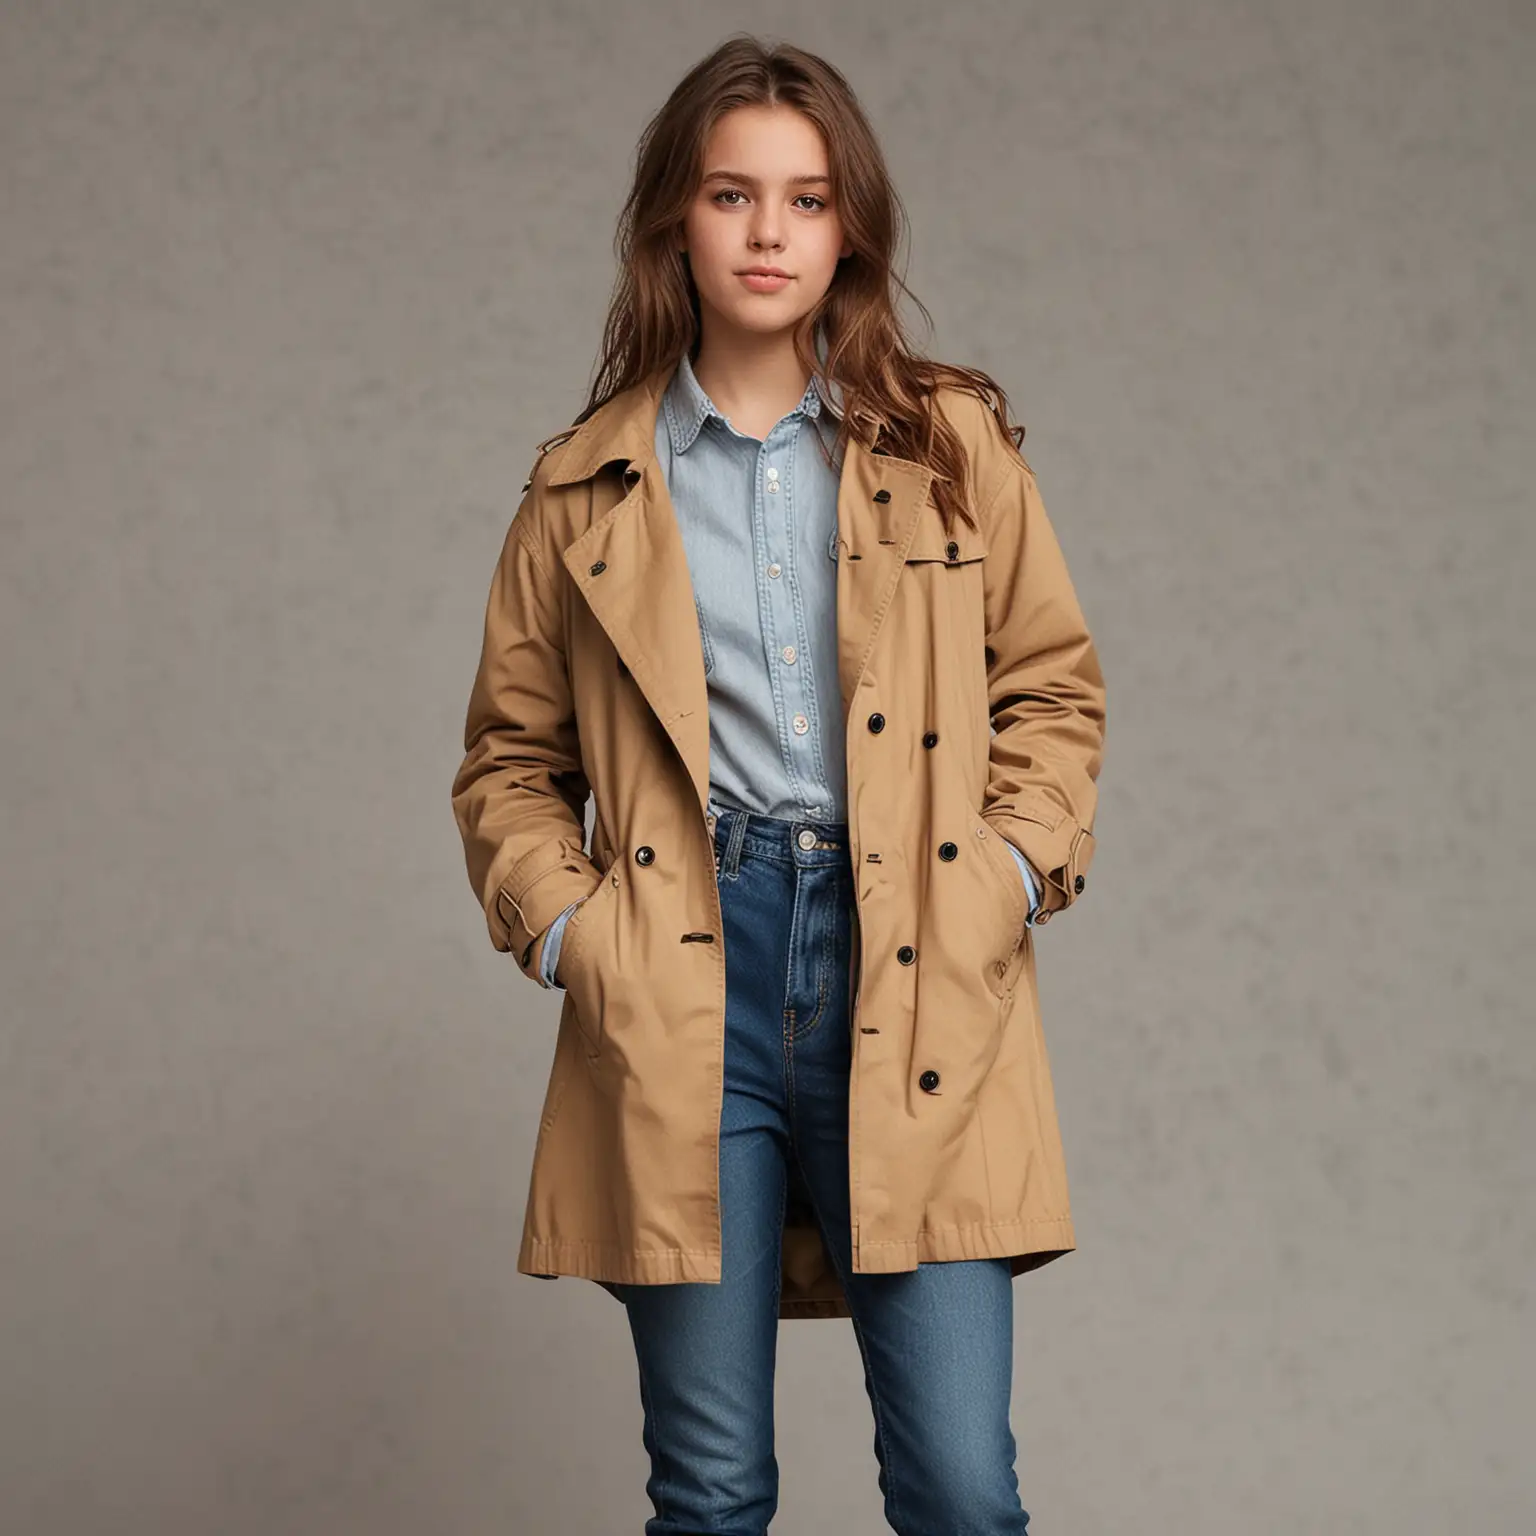 16-year old girl with trench coat jeans and boots with her hands in her pockets